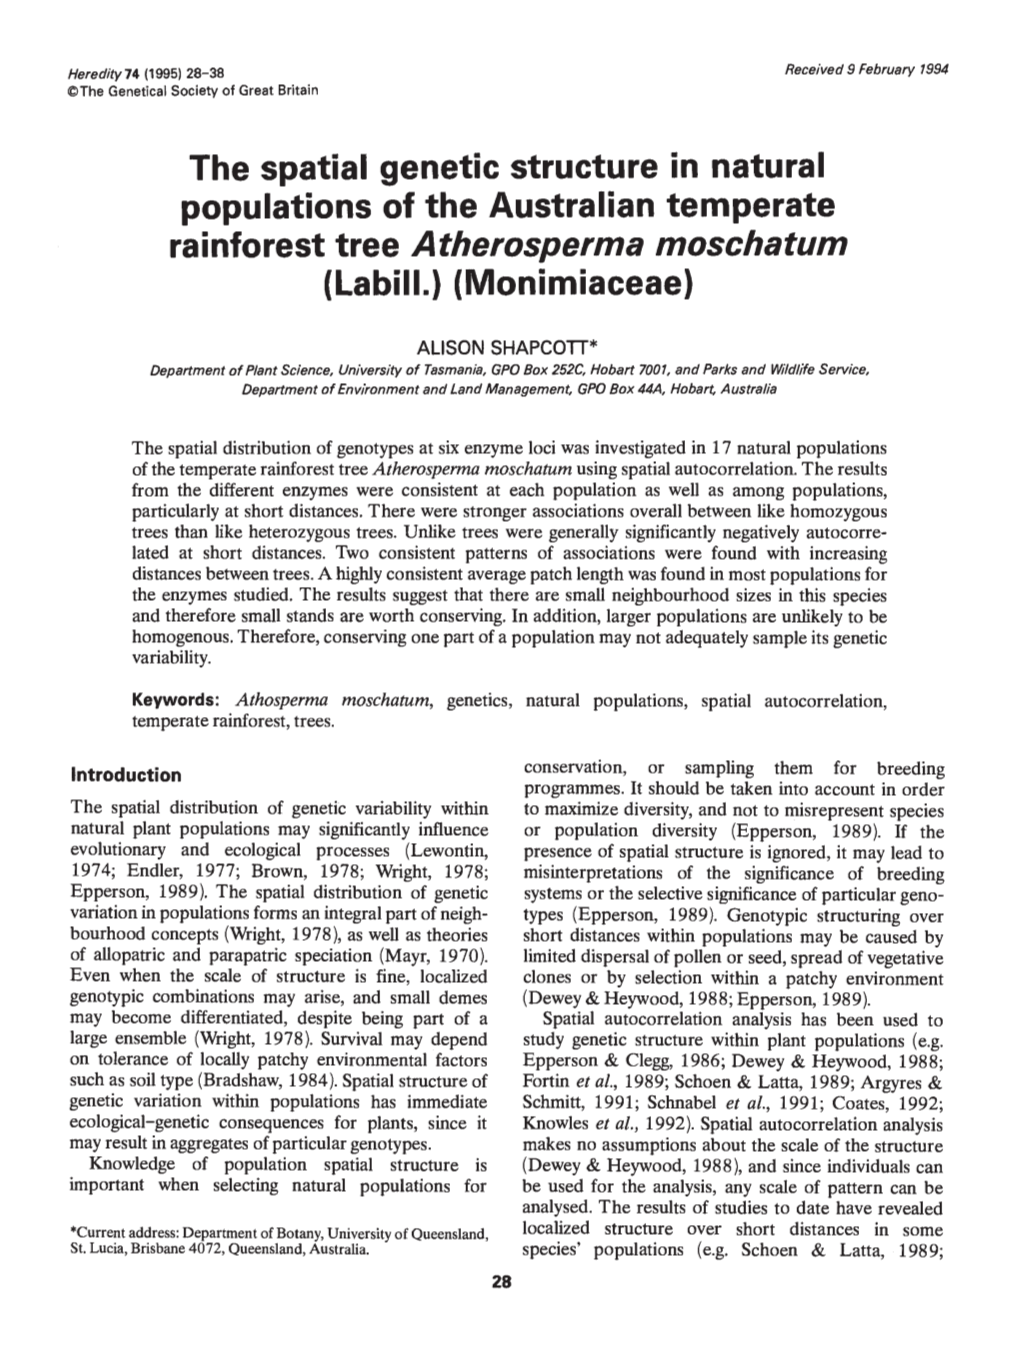 The Spatial Genetic Structure in Natural Populations of the Australian Temperate Rainforest Tree Atherosperma Moschatum (Labill.) (Monimiaceae)